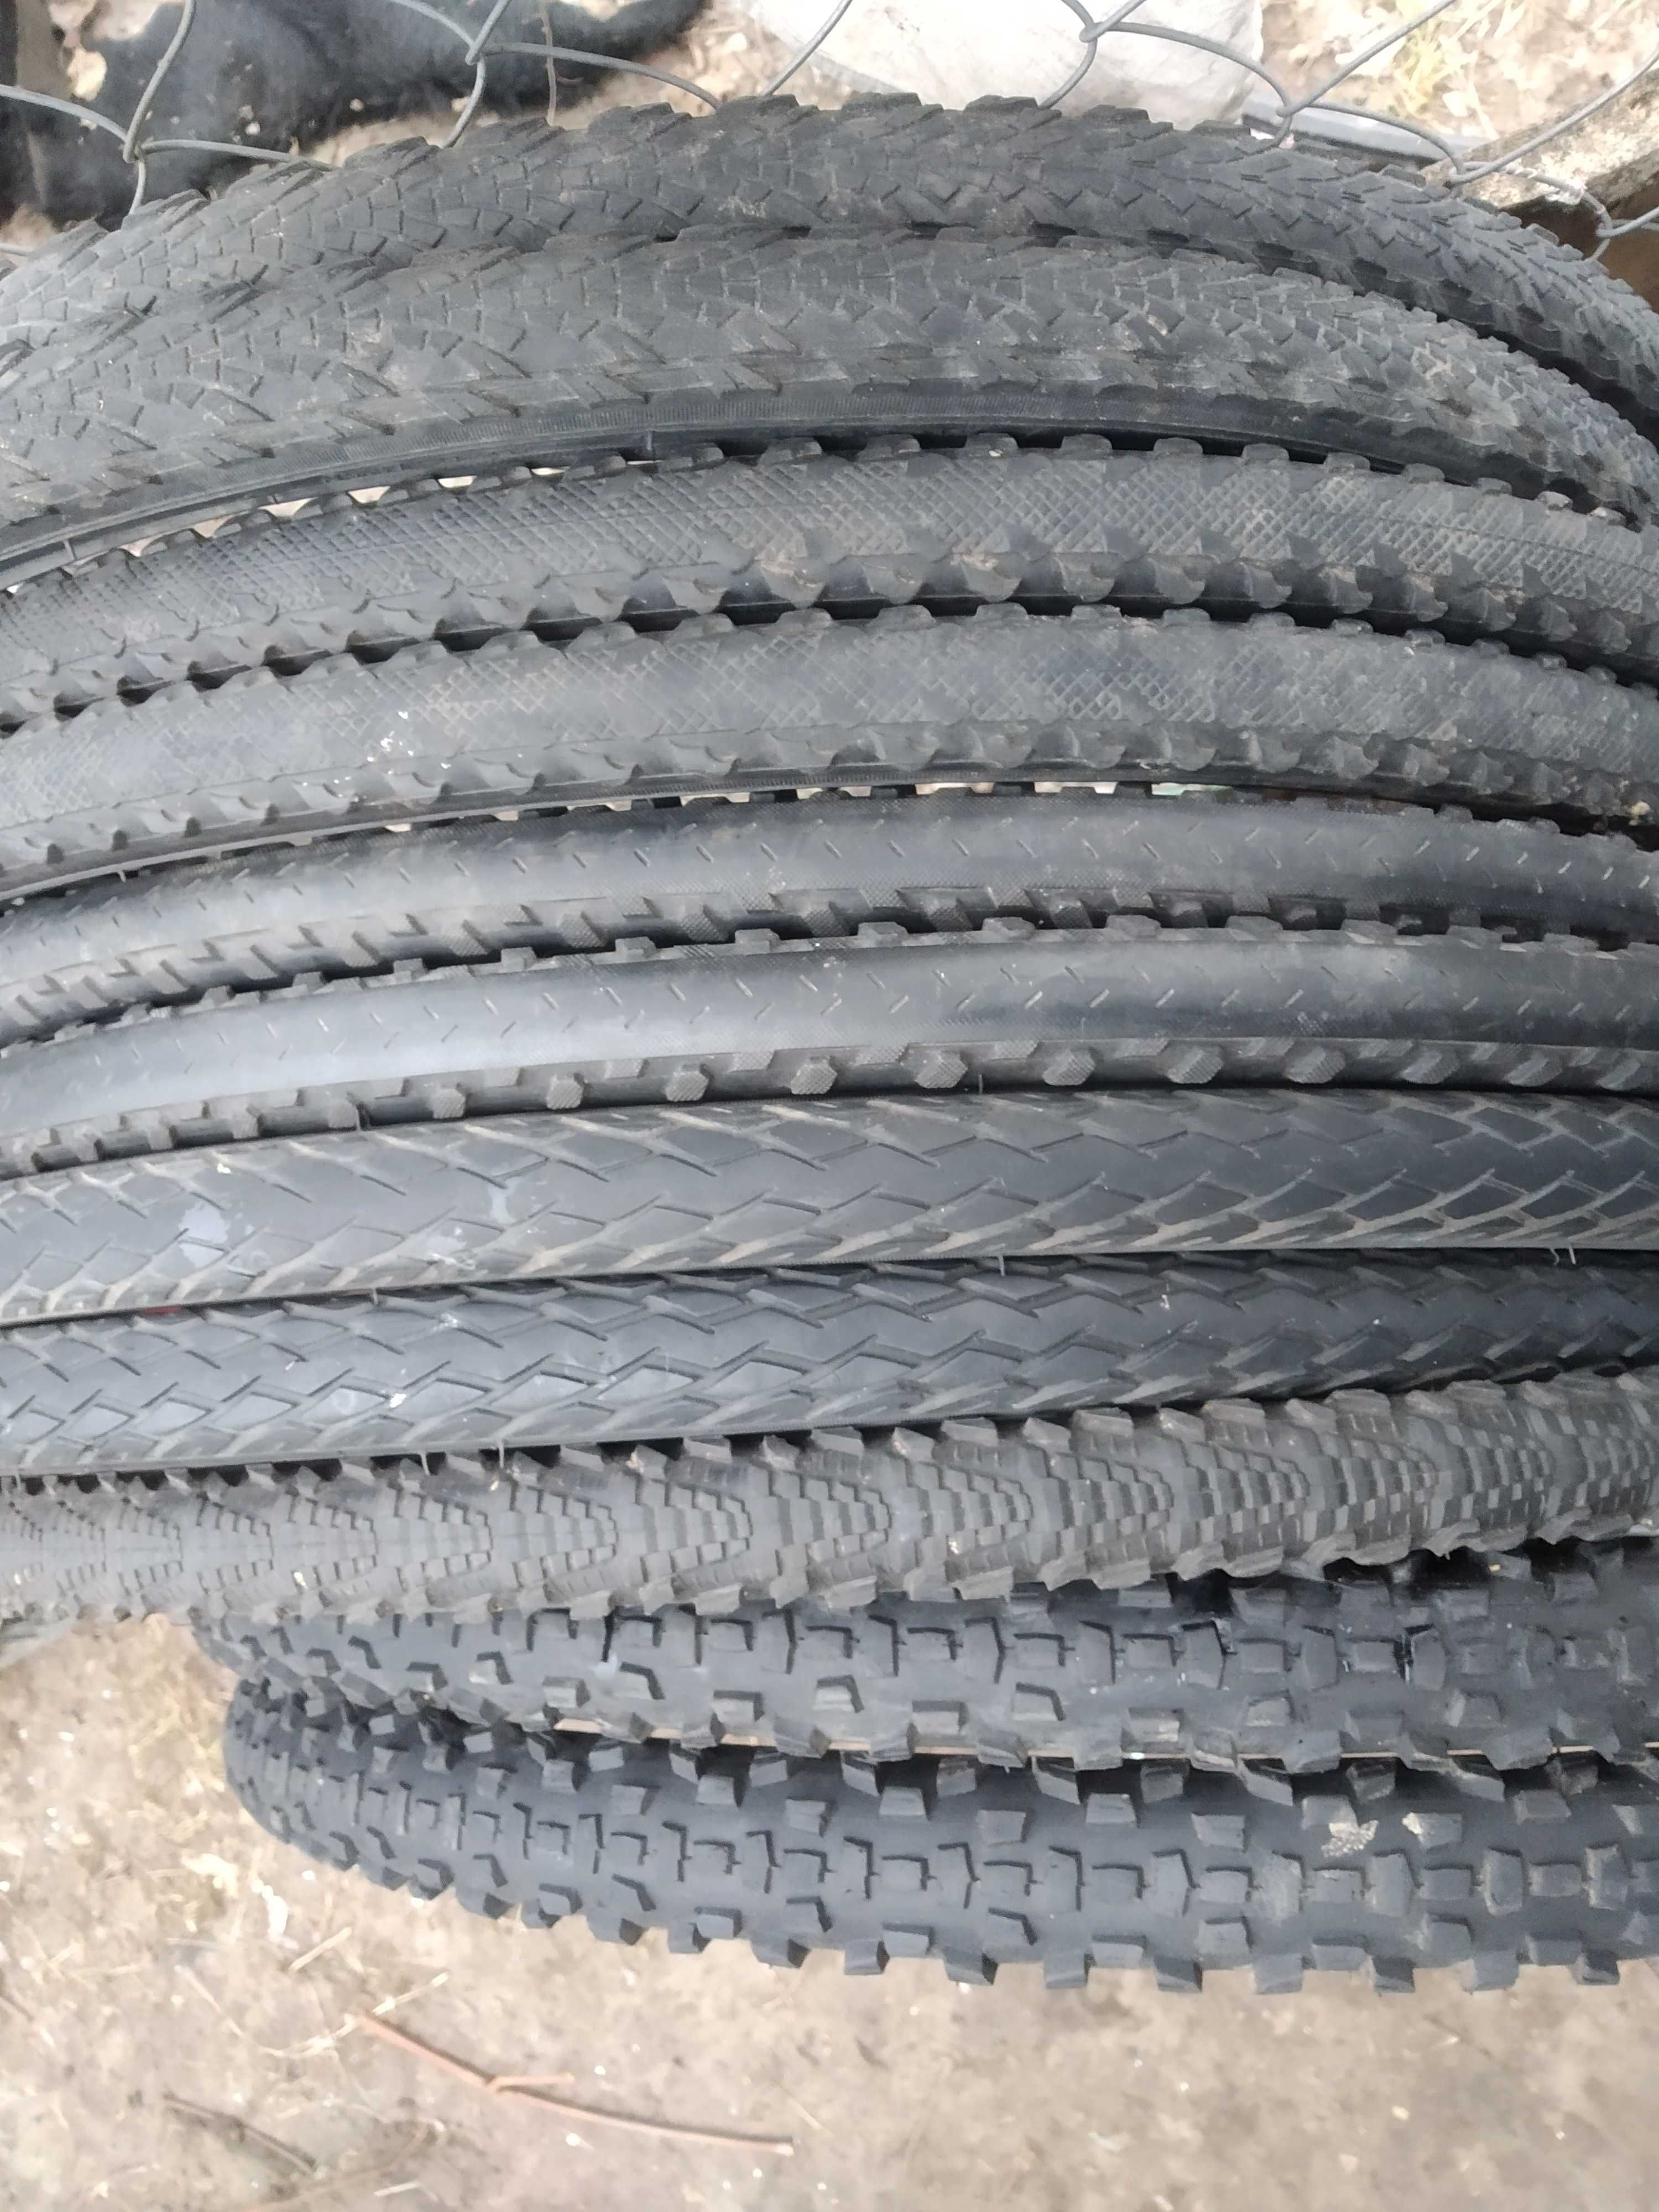 Покрышки  26 27.5 28 29 schwalbe,  Maxxis Continental  Folding.